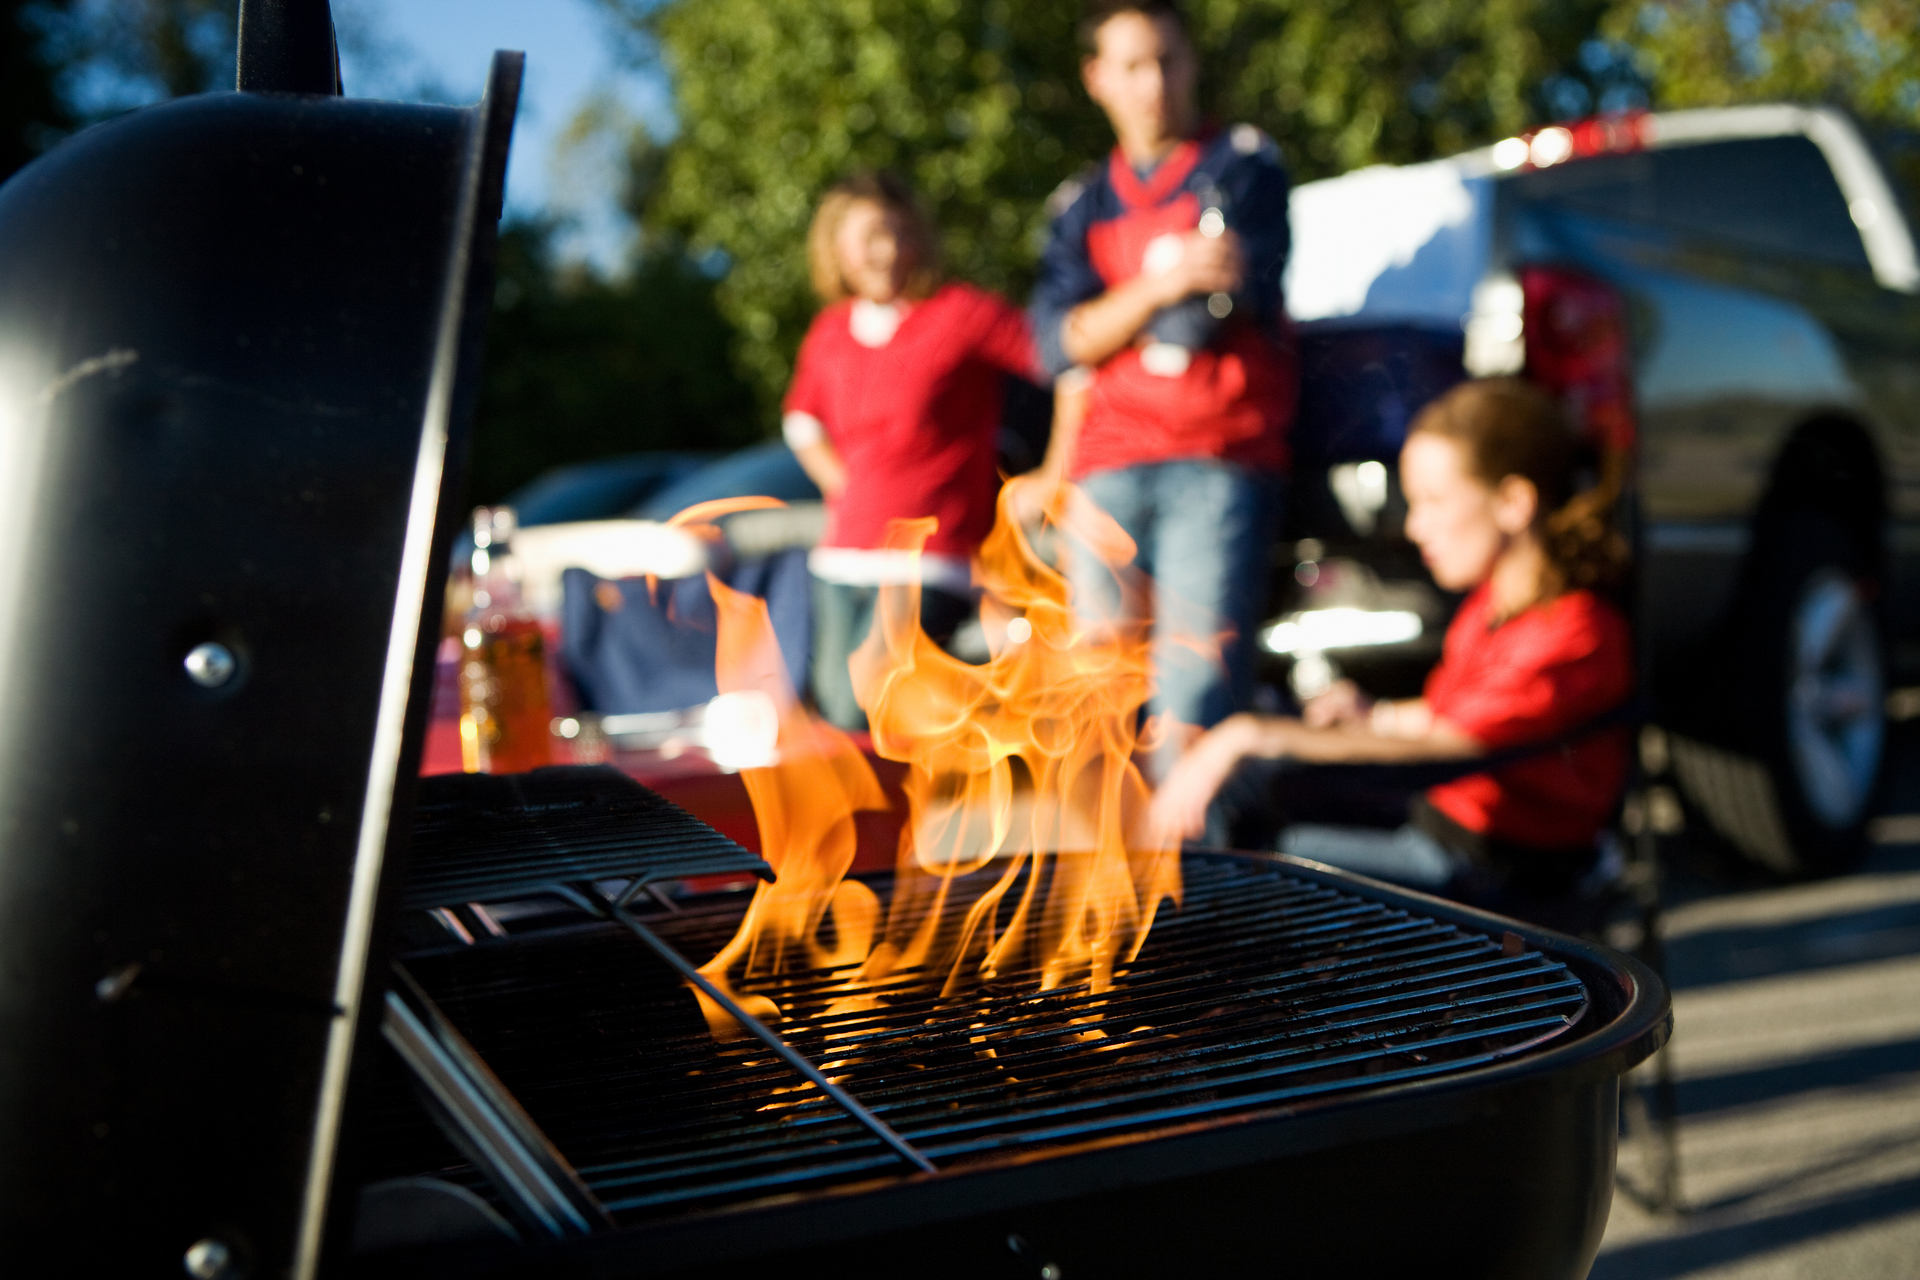 Charcoal Burning In Grill During Tailgating Party